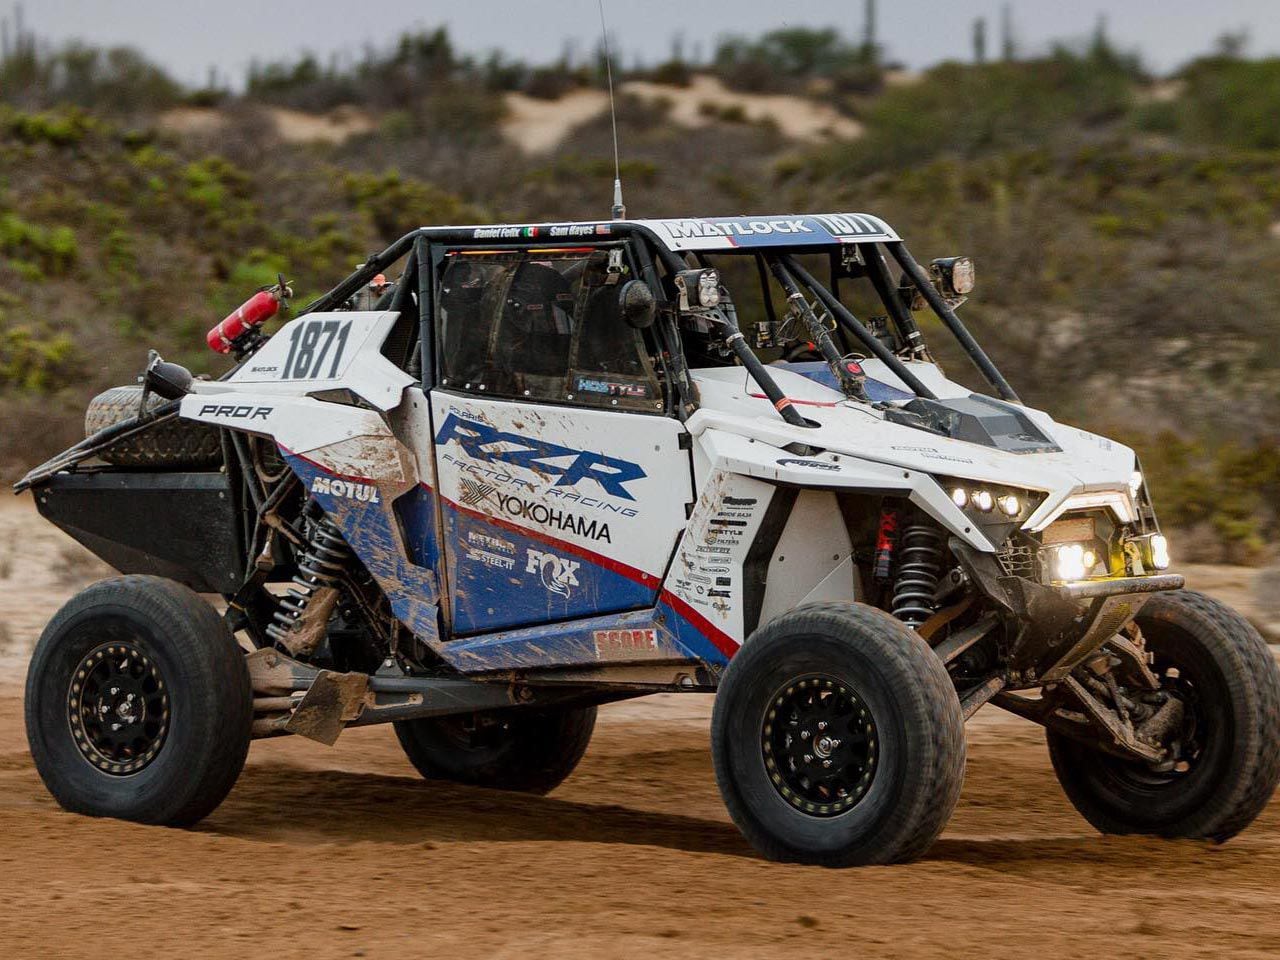 Vehicle No. 1,871 driven by Wayne Matlock is the all-new 2022 Polaris RZR Pro R in full racing form.